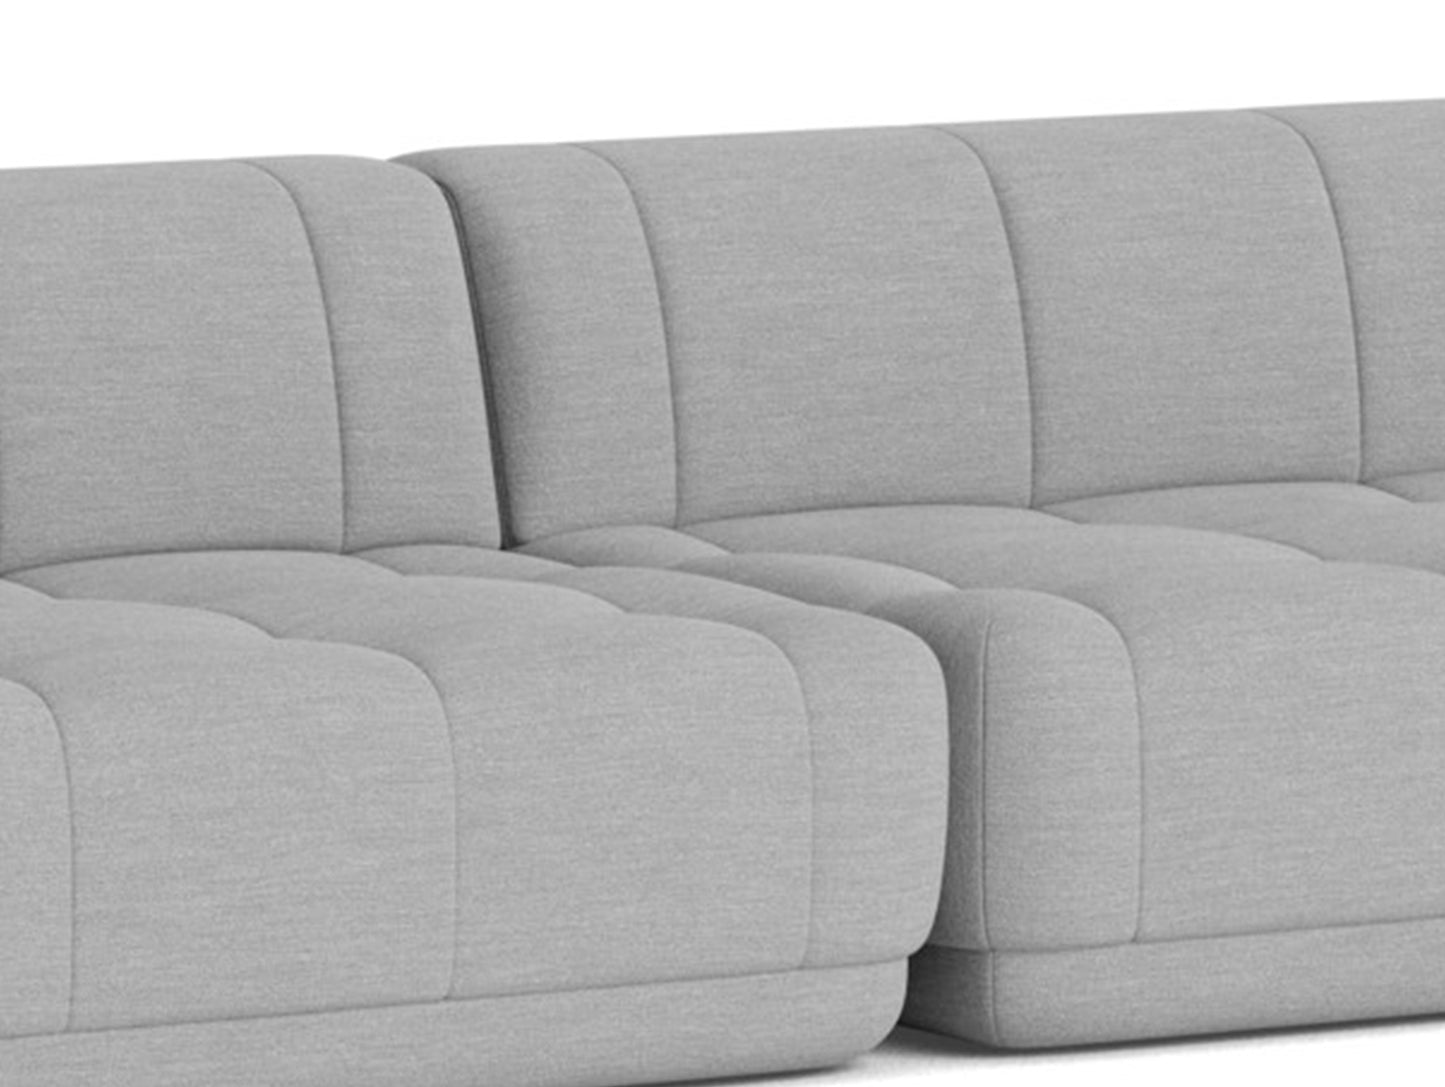 Quilton Sofa - Combination 27 by HAY / Combintion 27 / Mode 008